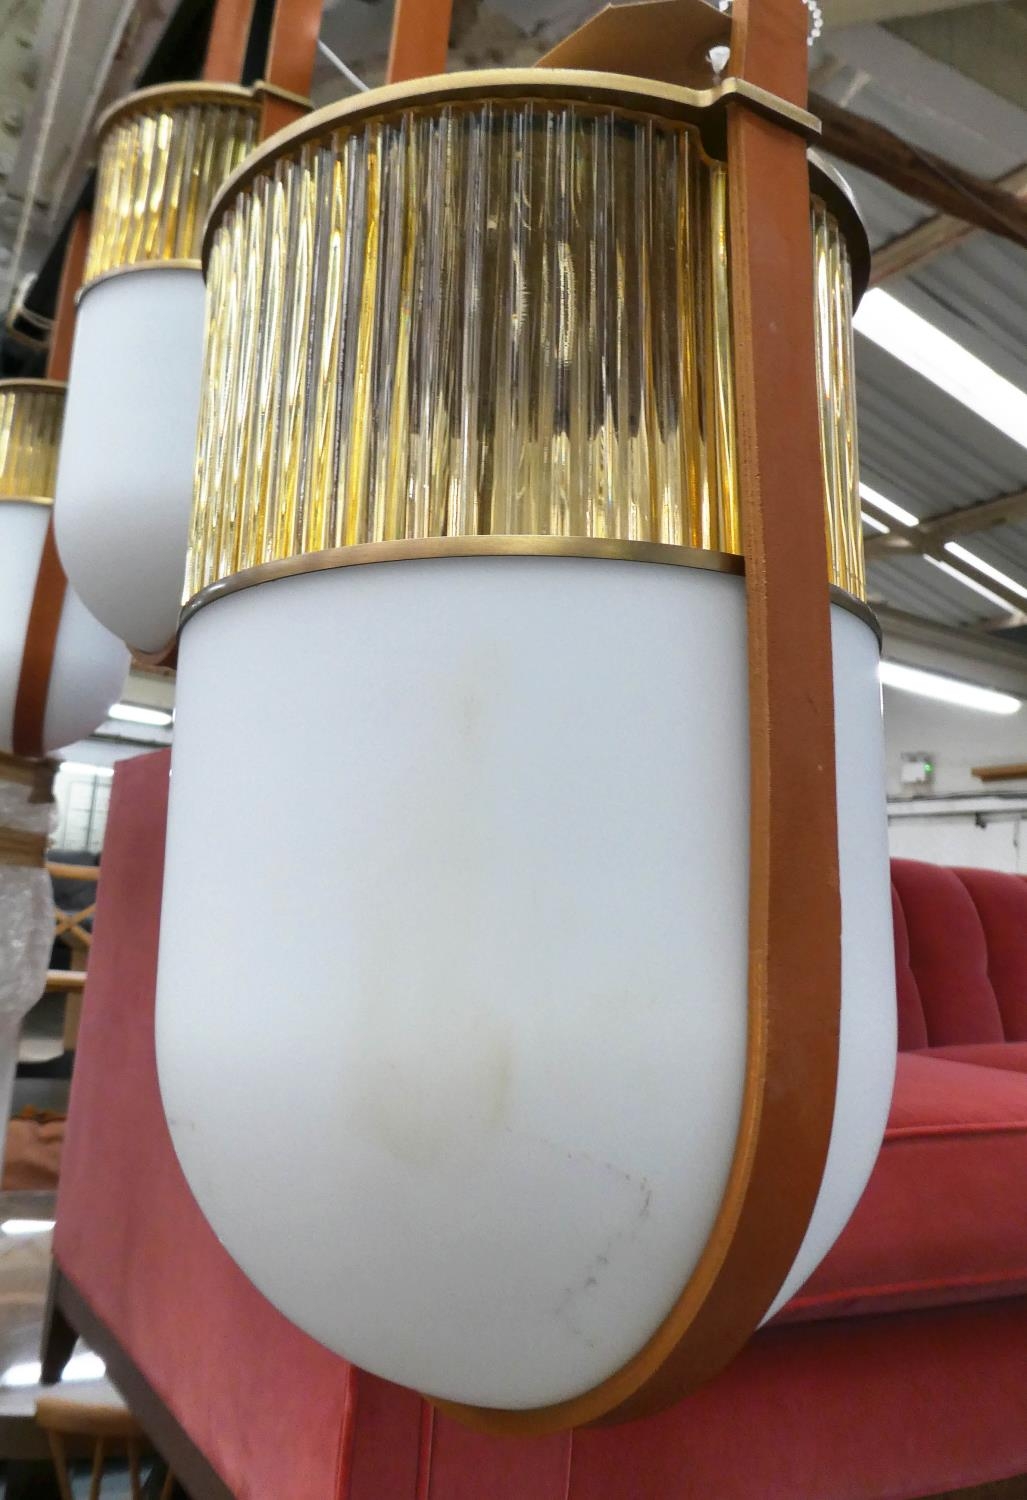 POLTRONA FRAU XI COMPOSITION L PENDANT LAMP BY NERI & HU, 70cm drop at largest. - Image 2 of 6